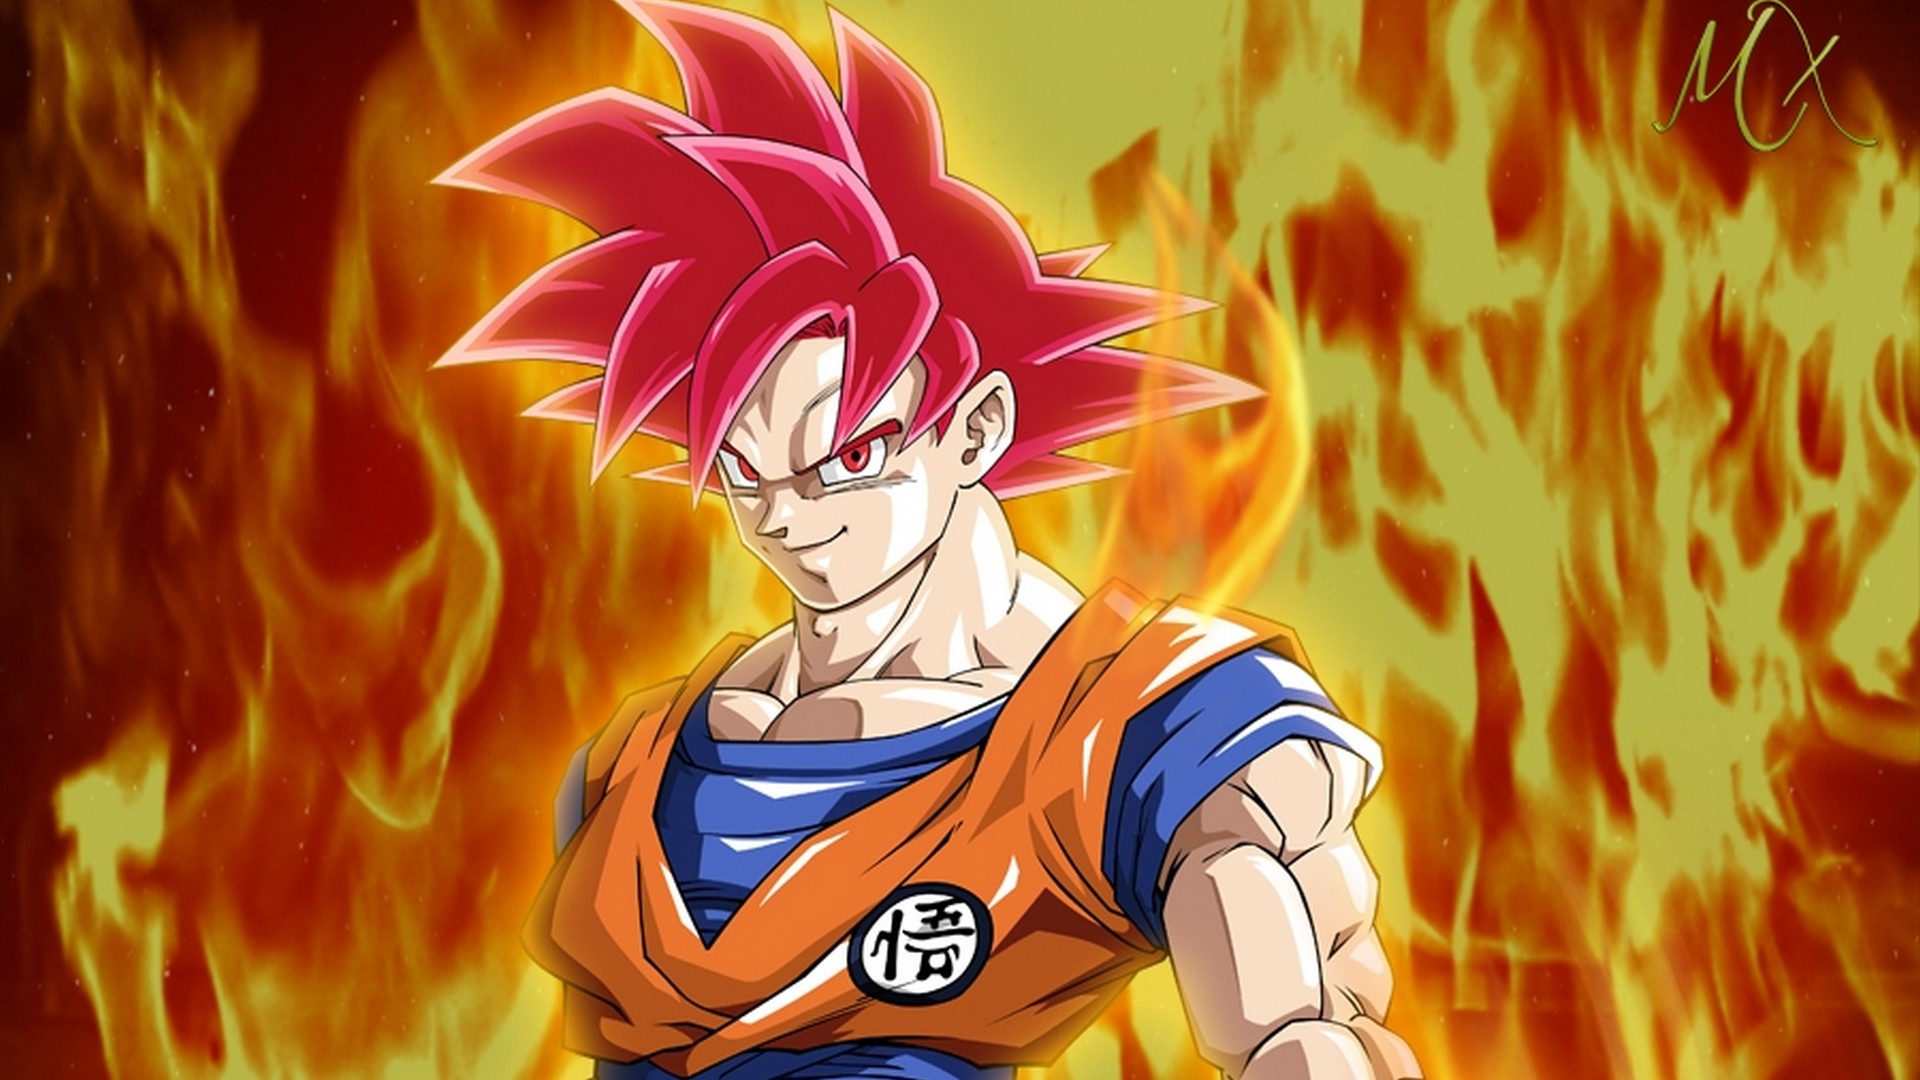 Goku Super Saiyan God Wallpaper with resolution 1920X1080 pixel. You can use this wallpaper as background for your desktop Computer Screensavers, Android or iPhone smartphones